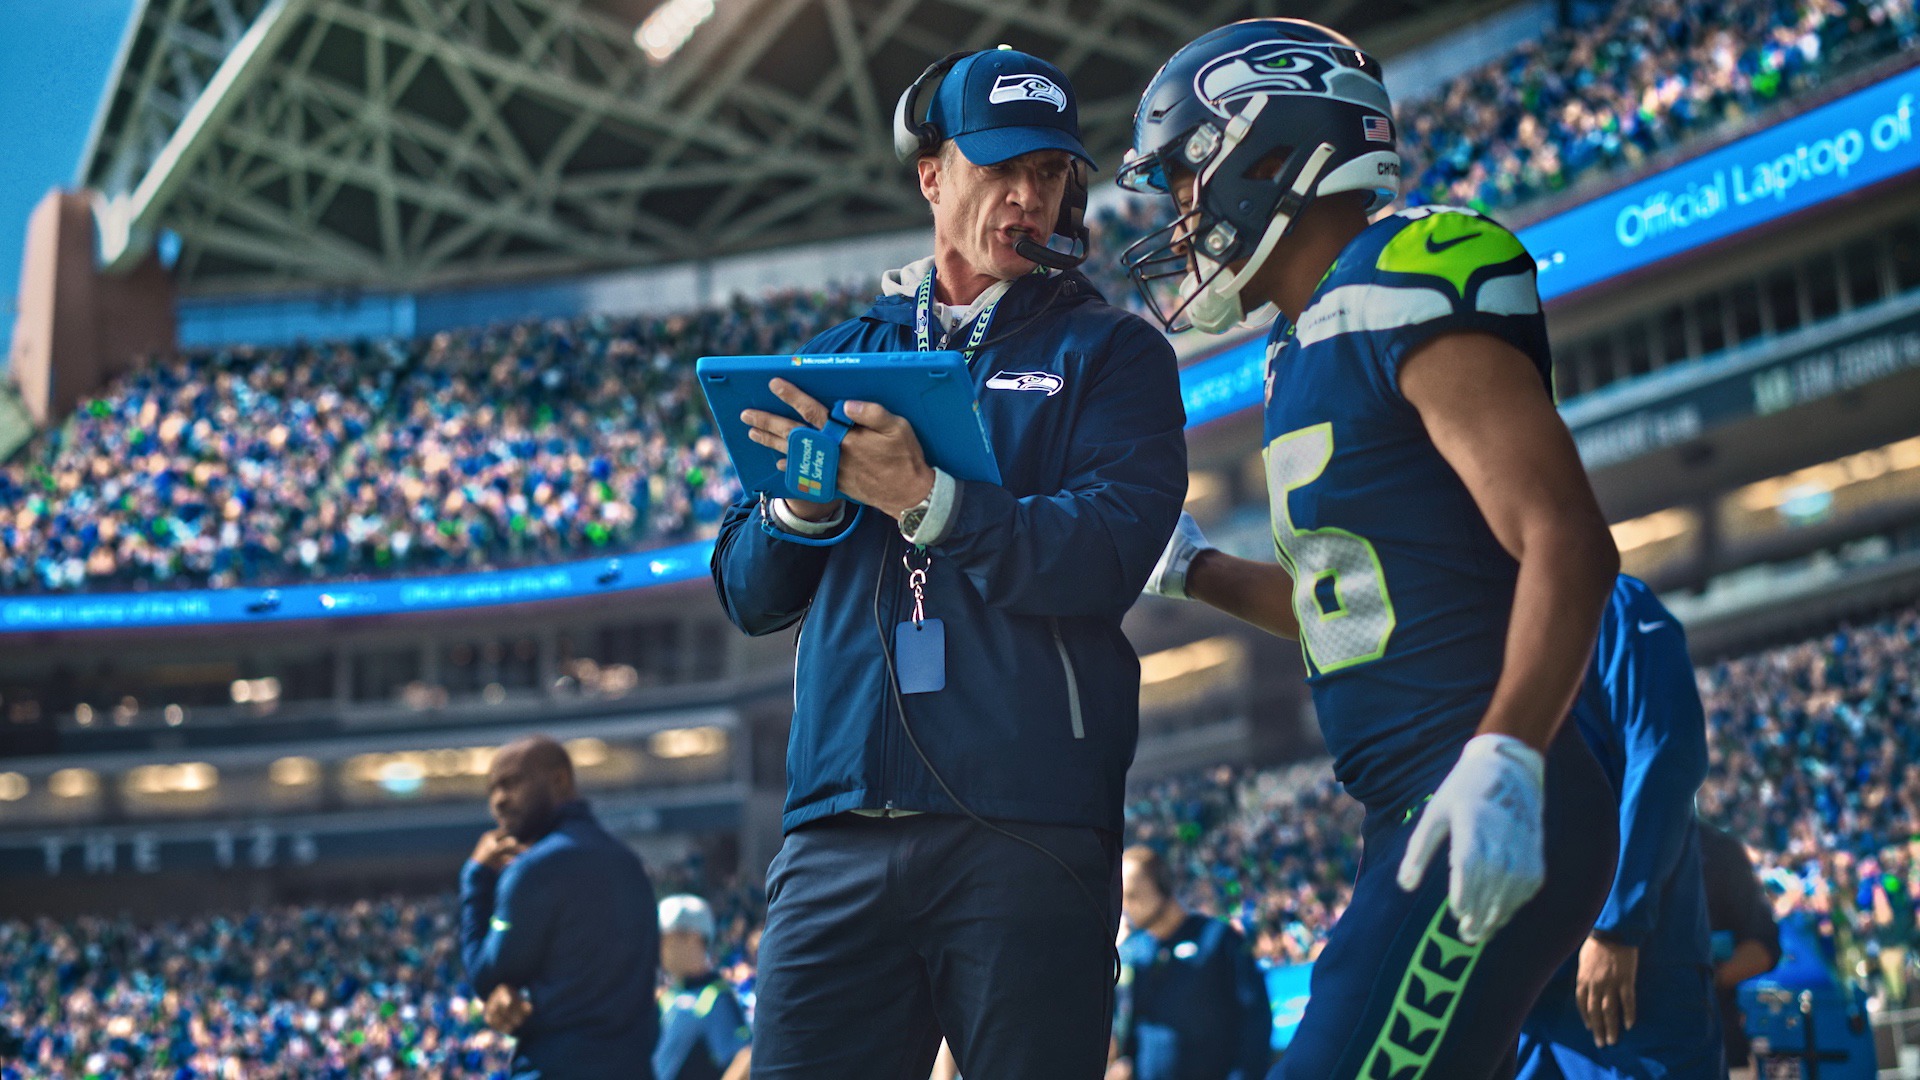 NFL player Tyler Lockett stands wearing his helmet and jersey talking to his coach who is holding a Microsoft Surface. They stand in the center frame with a crowd of fans in the stadium seats behind them.